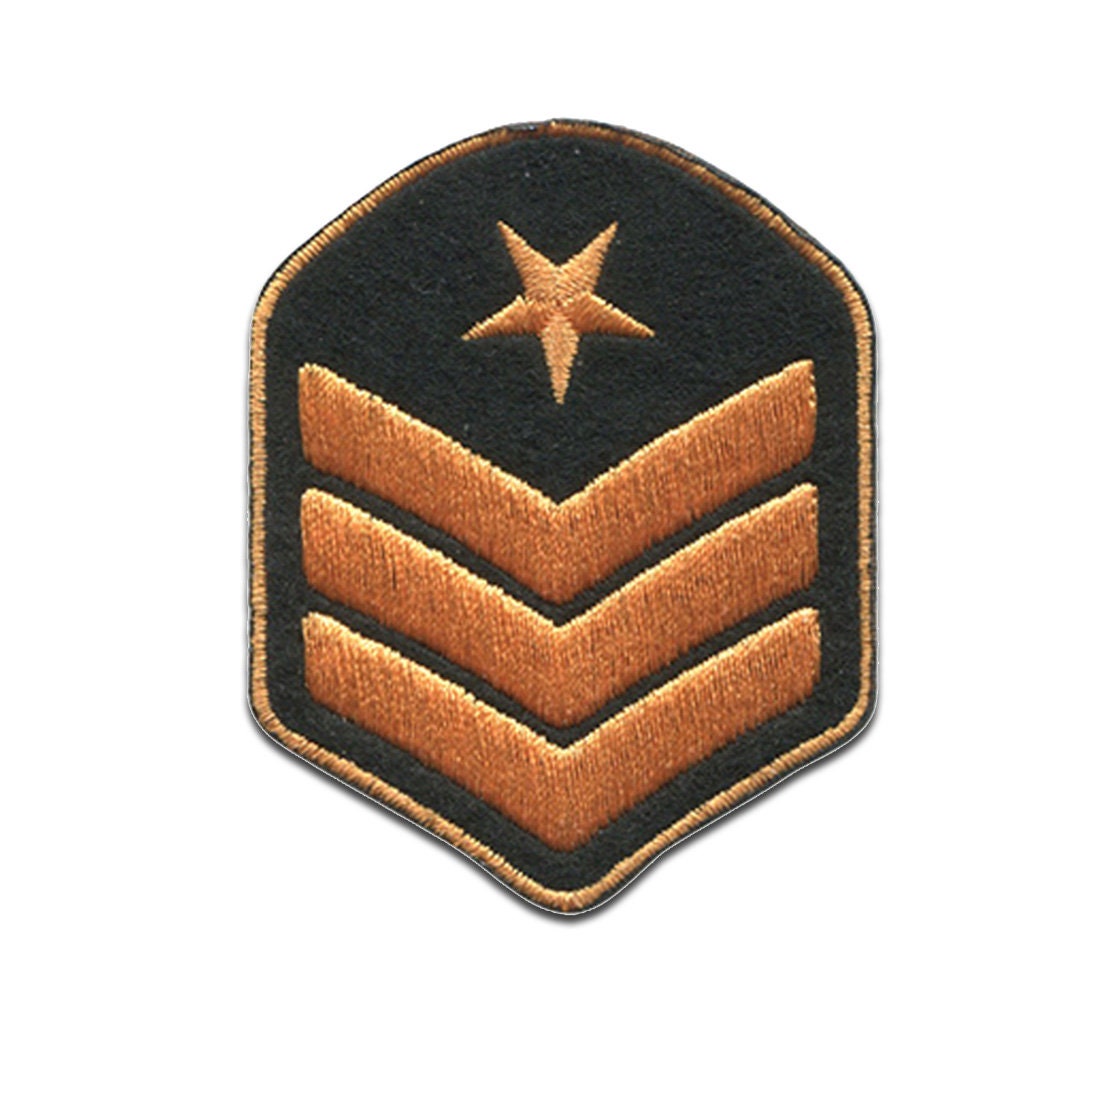 FRANCE ARMY INSIGNIA MILITARY IRON ON GLUE PATCHES PATCH EMBROIDED OPEX